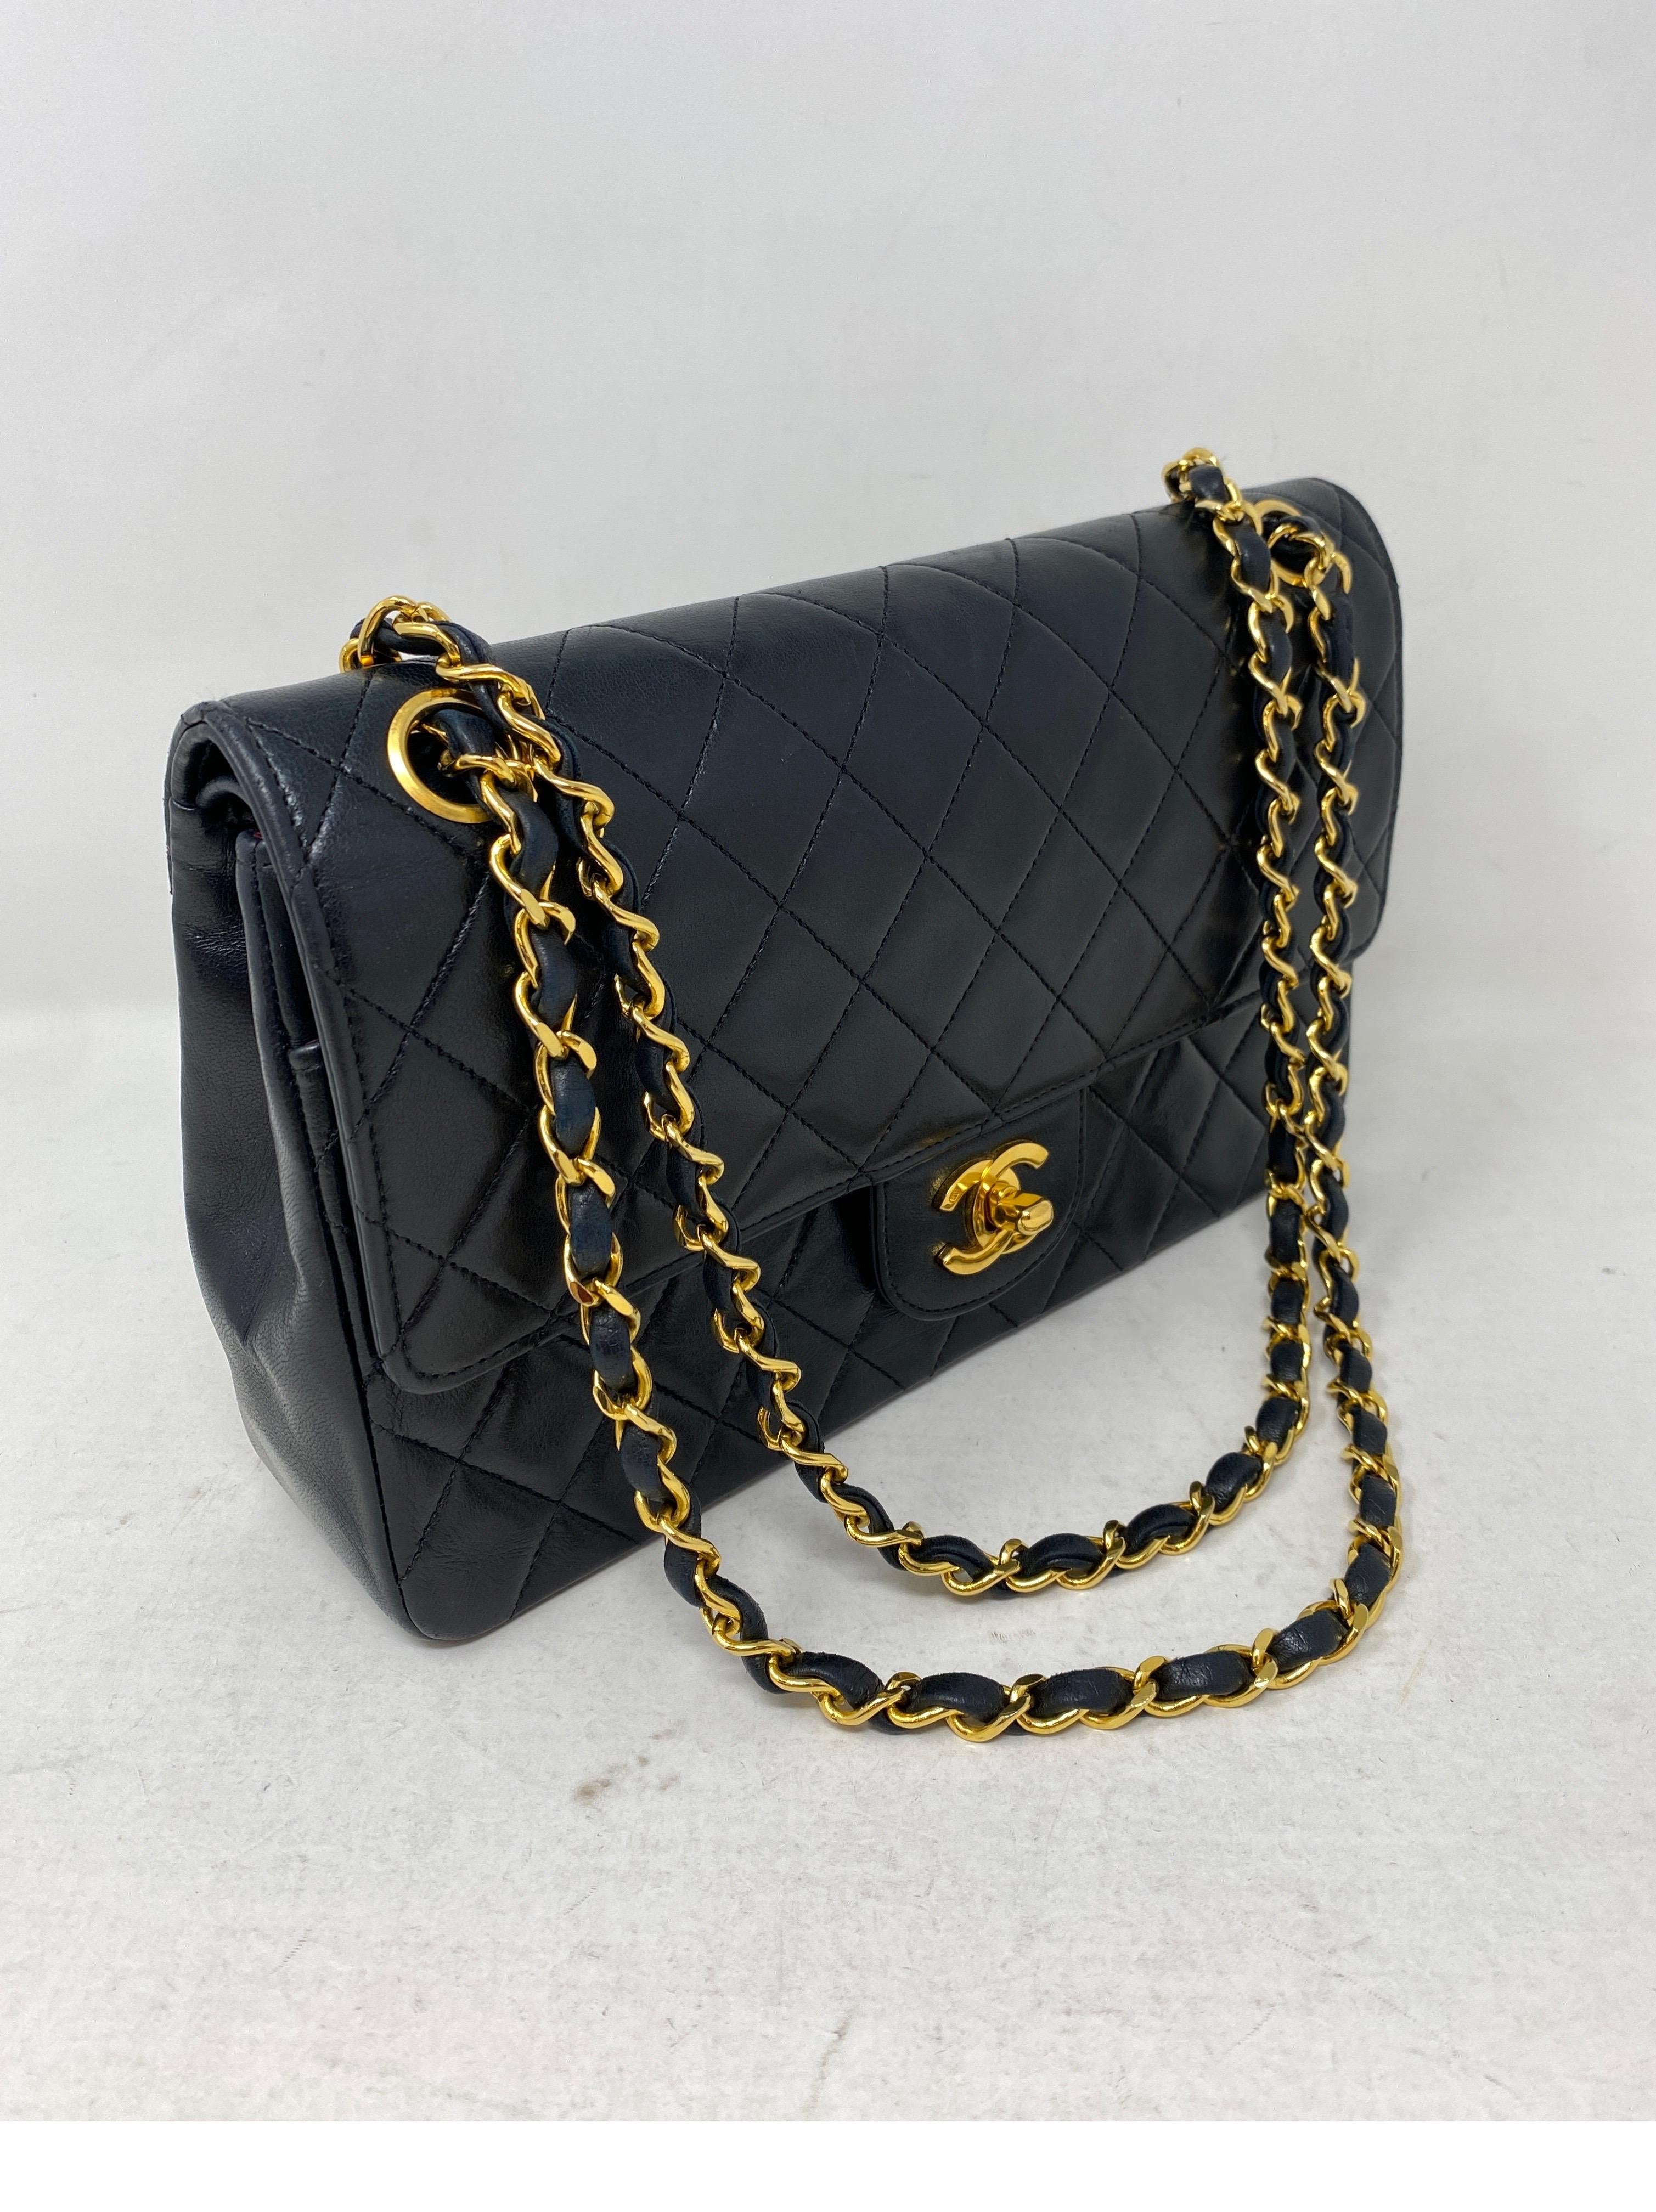 Chanel Medium Double Flap Bag. Black lambskin leather bag. Gold hardware. Vintage Chanel Bag. 24 kt gold plated hardware. Classic bag from Chanel. Side pocket has light wear and rubbing from age. Beautiful bag overall. Classic 10